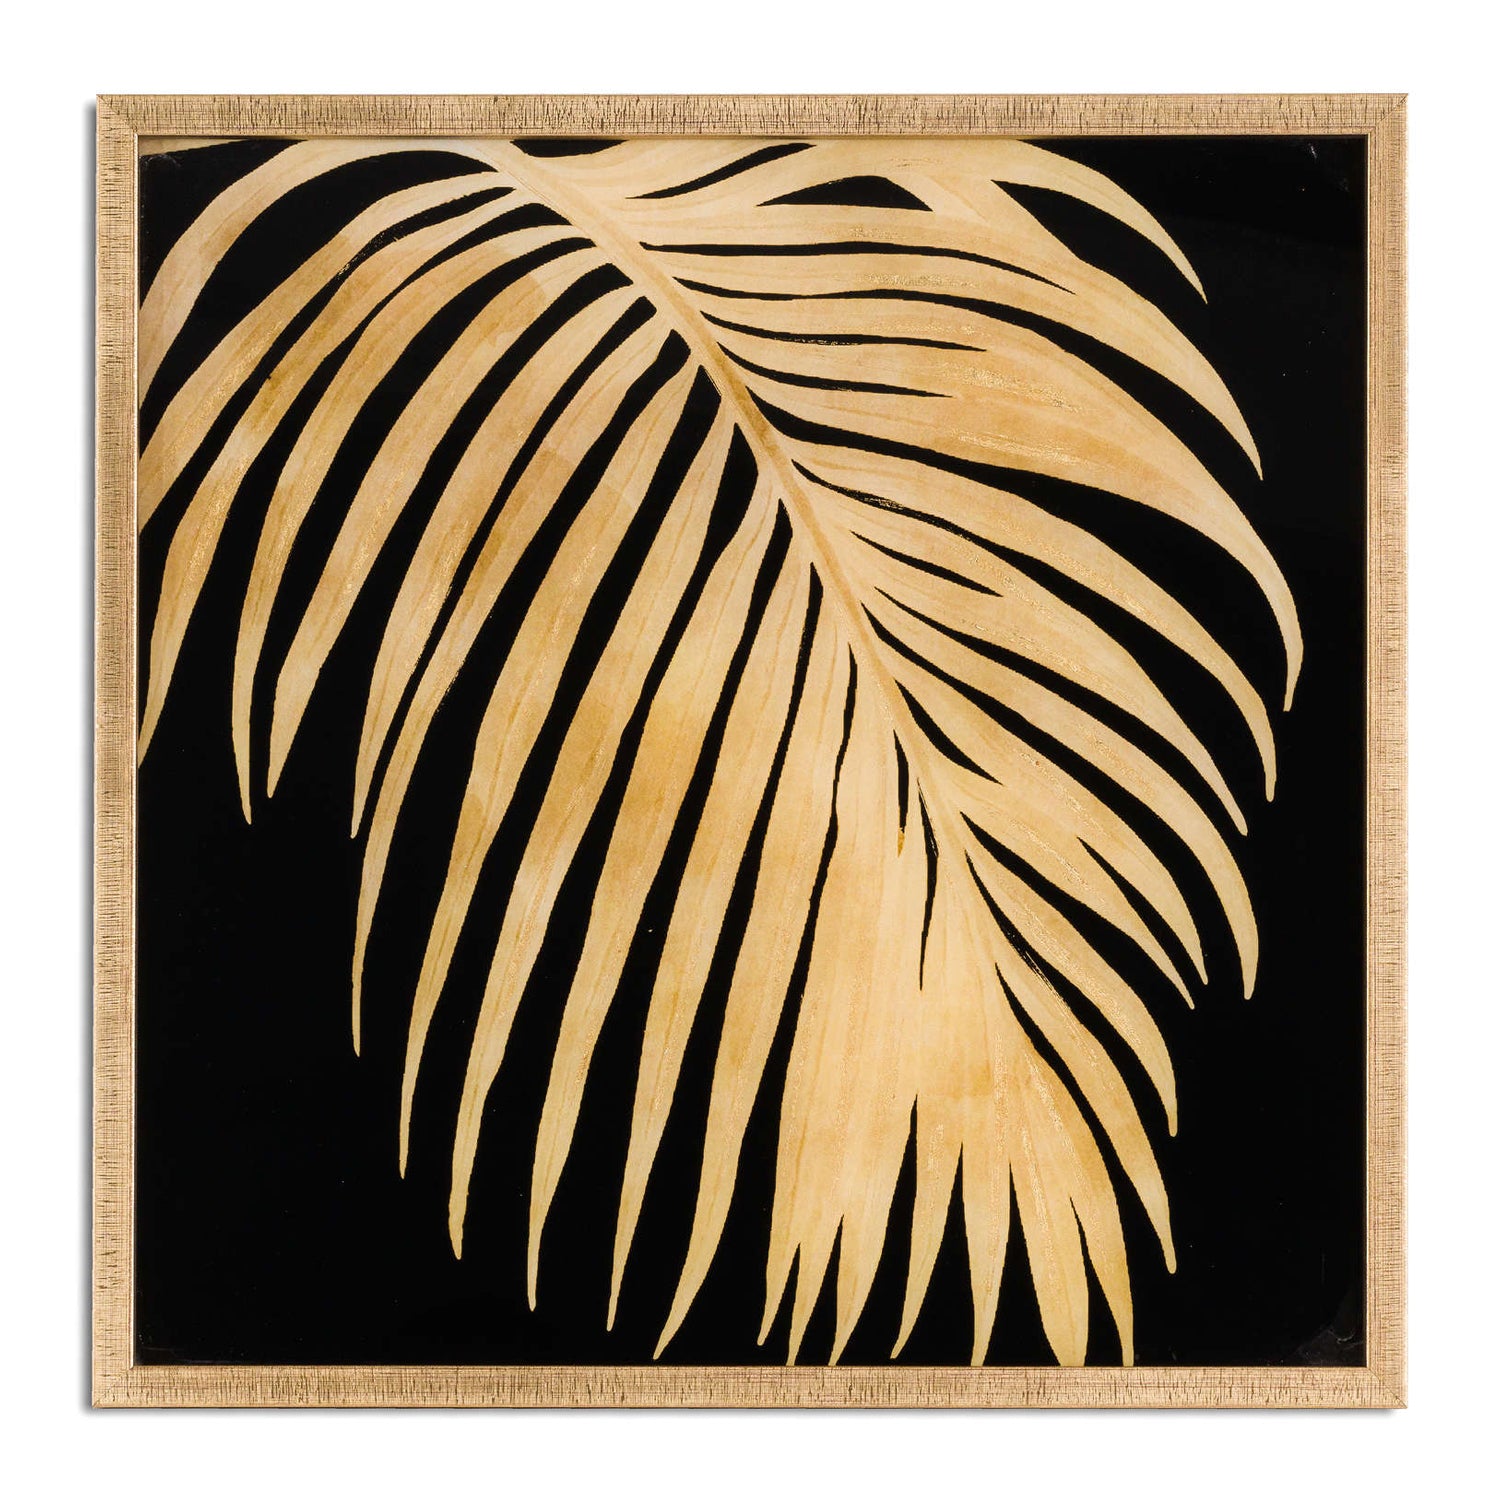 Metallic palm glass image in gold frame